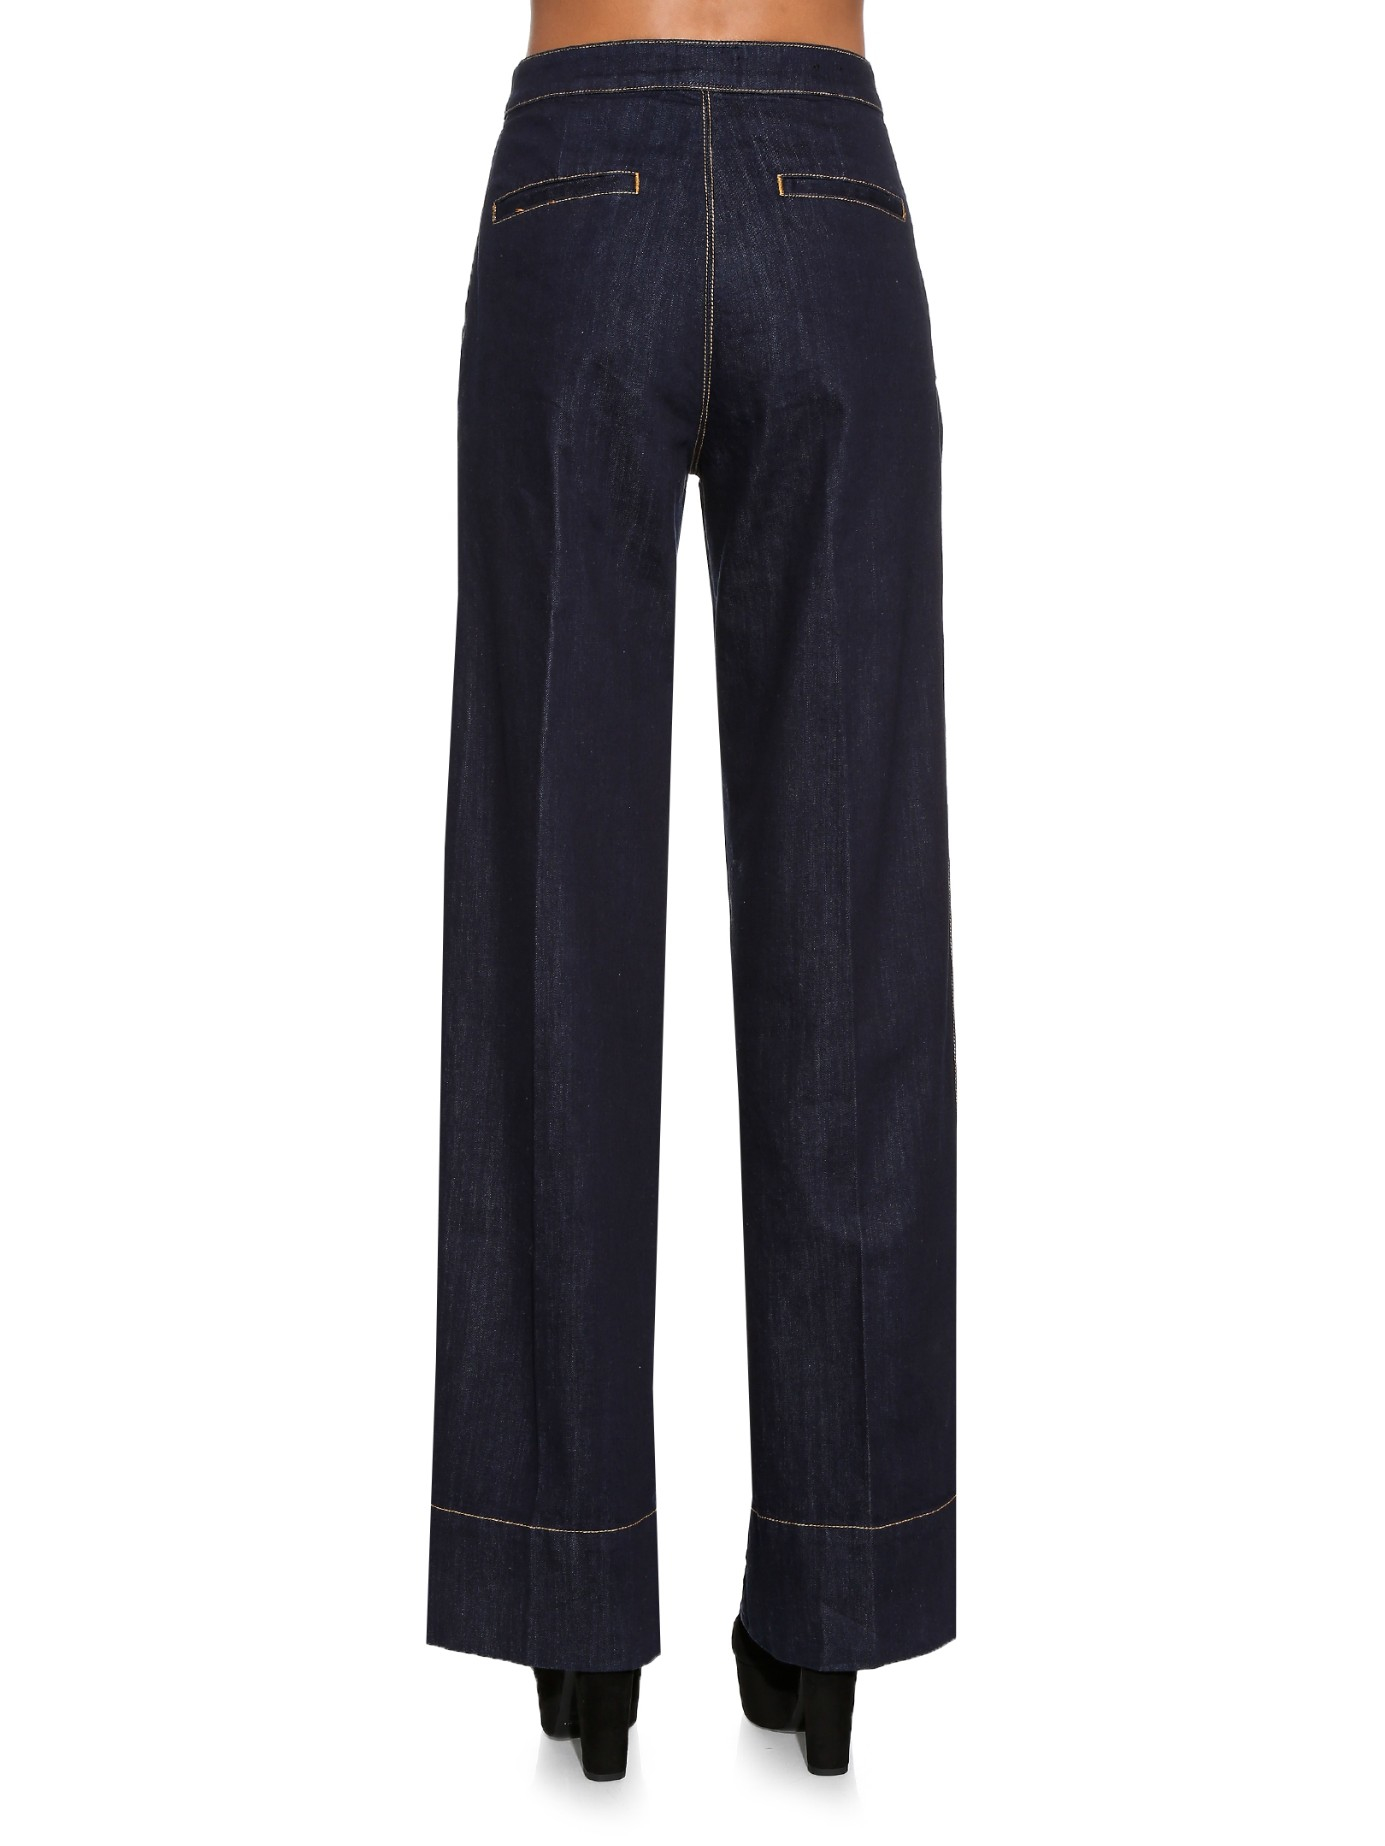 Lyst - Vivienne Westwood Anglomania Vader Wide-leg Pleated Jeans in Blue